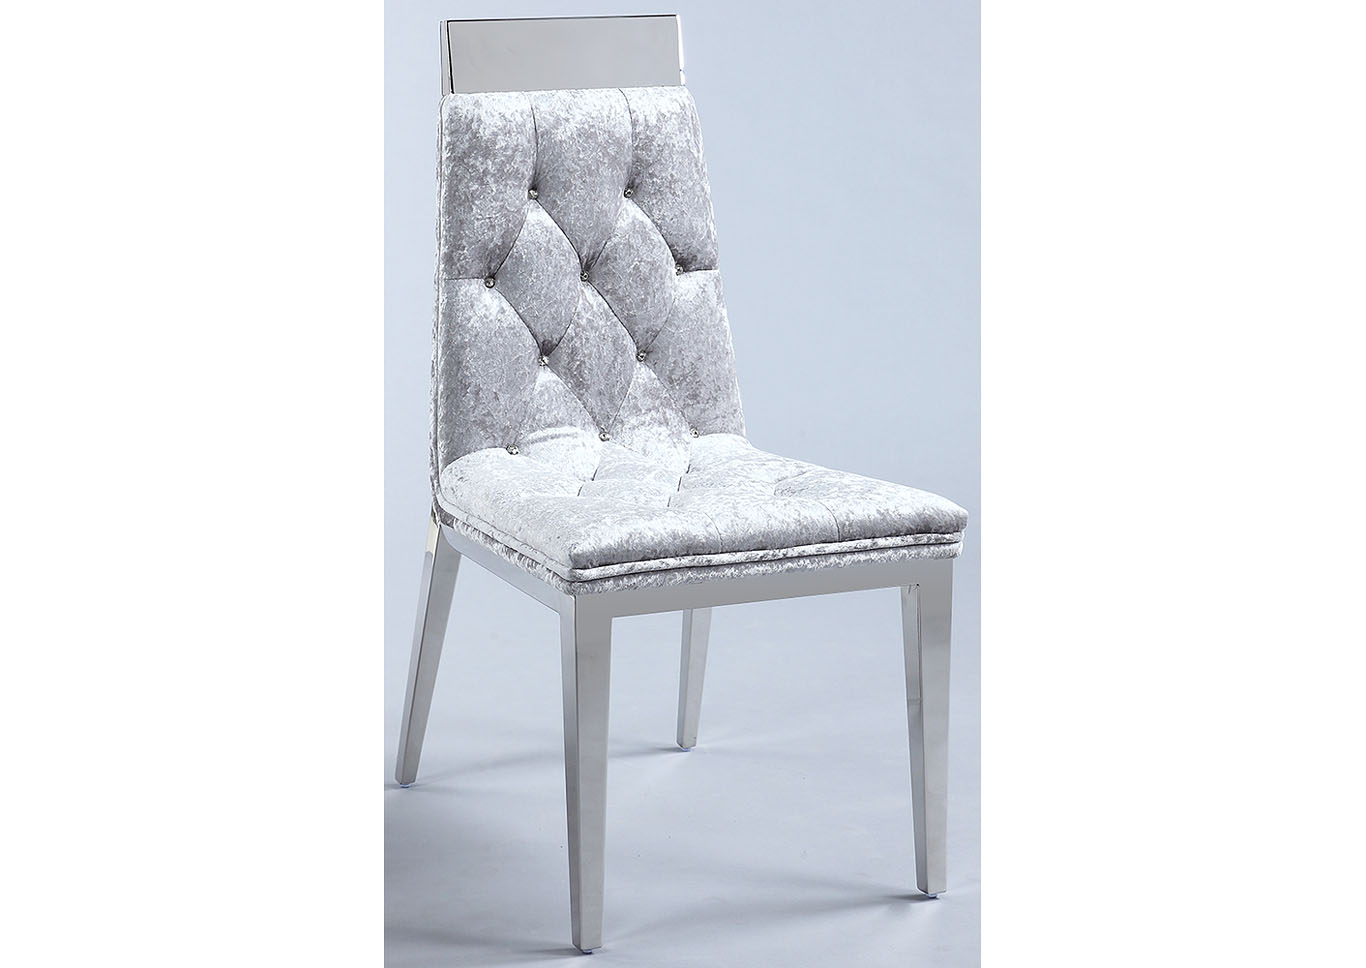 Norma Light Grey Tufted Chair (Set of 2) w/ Crystal Accent,Chintaly Imports